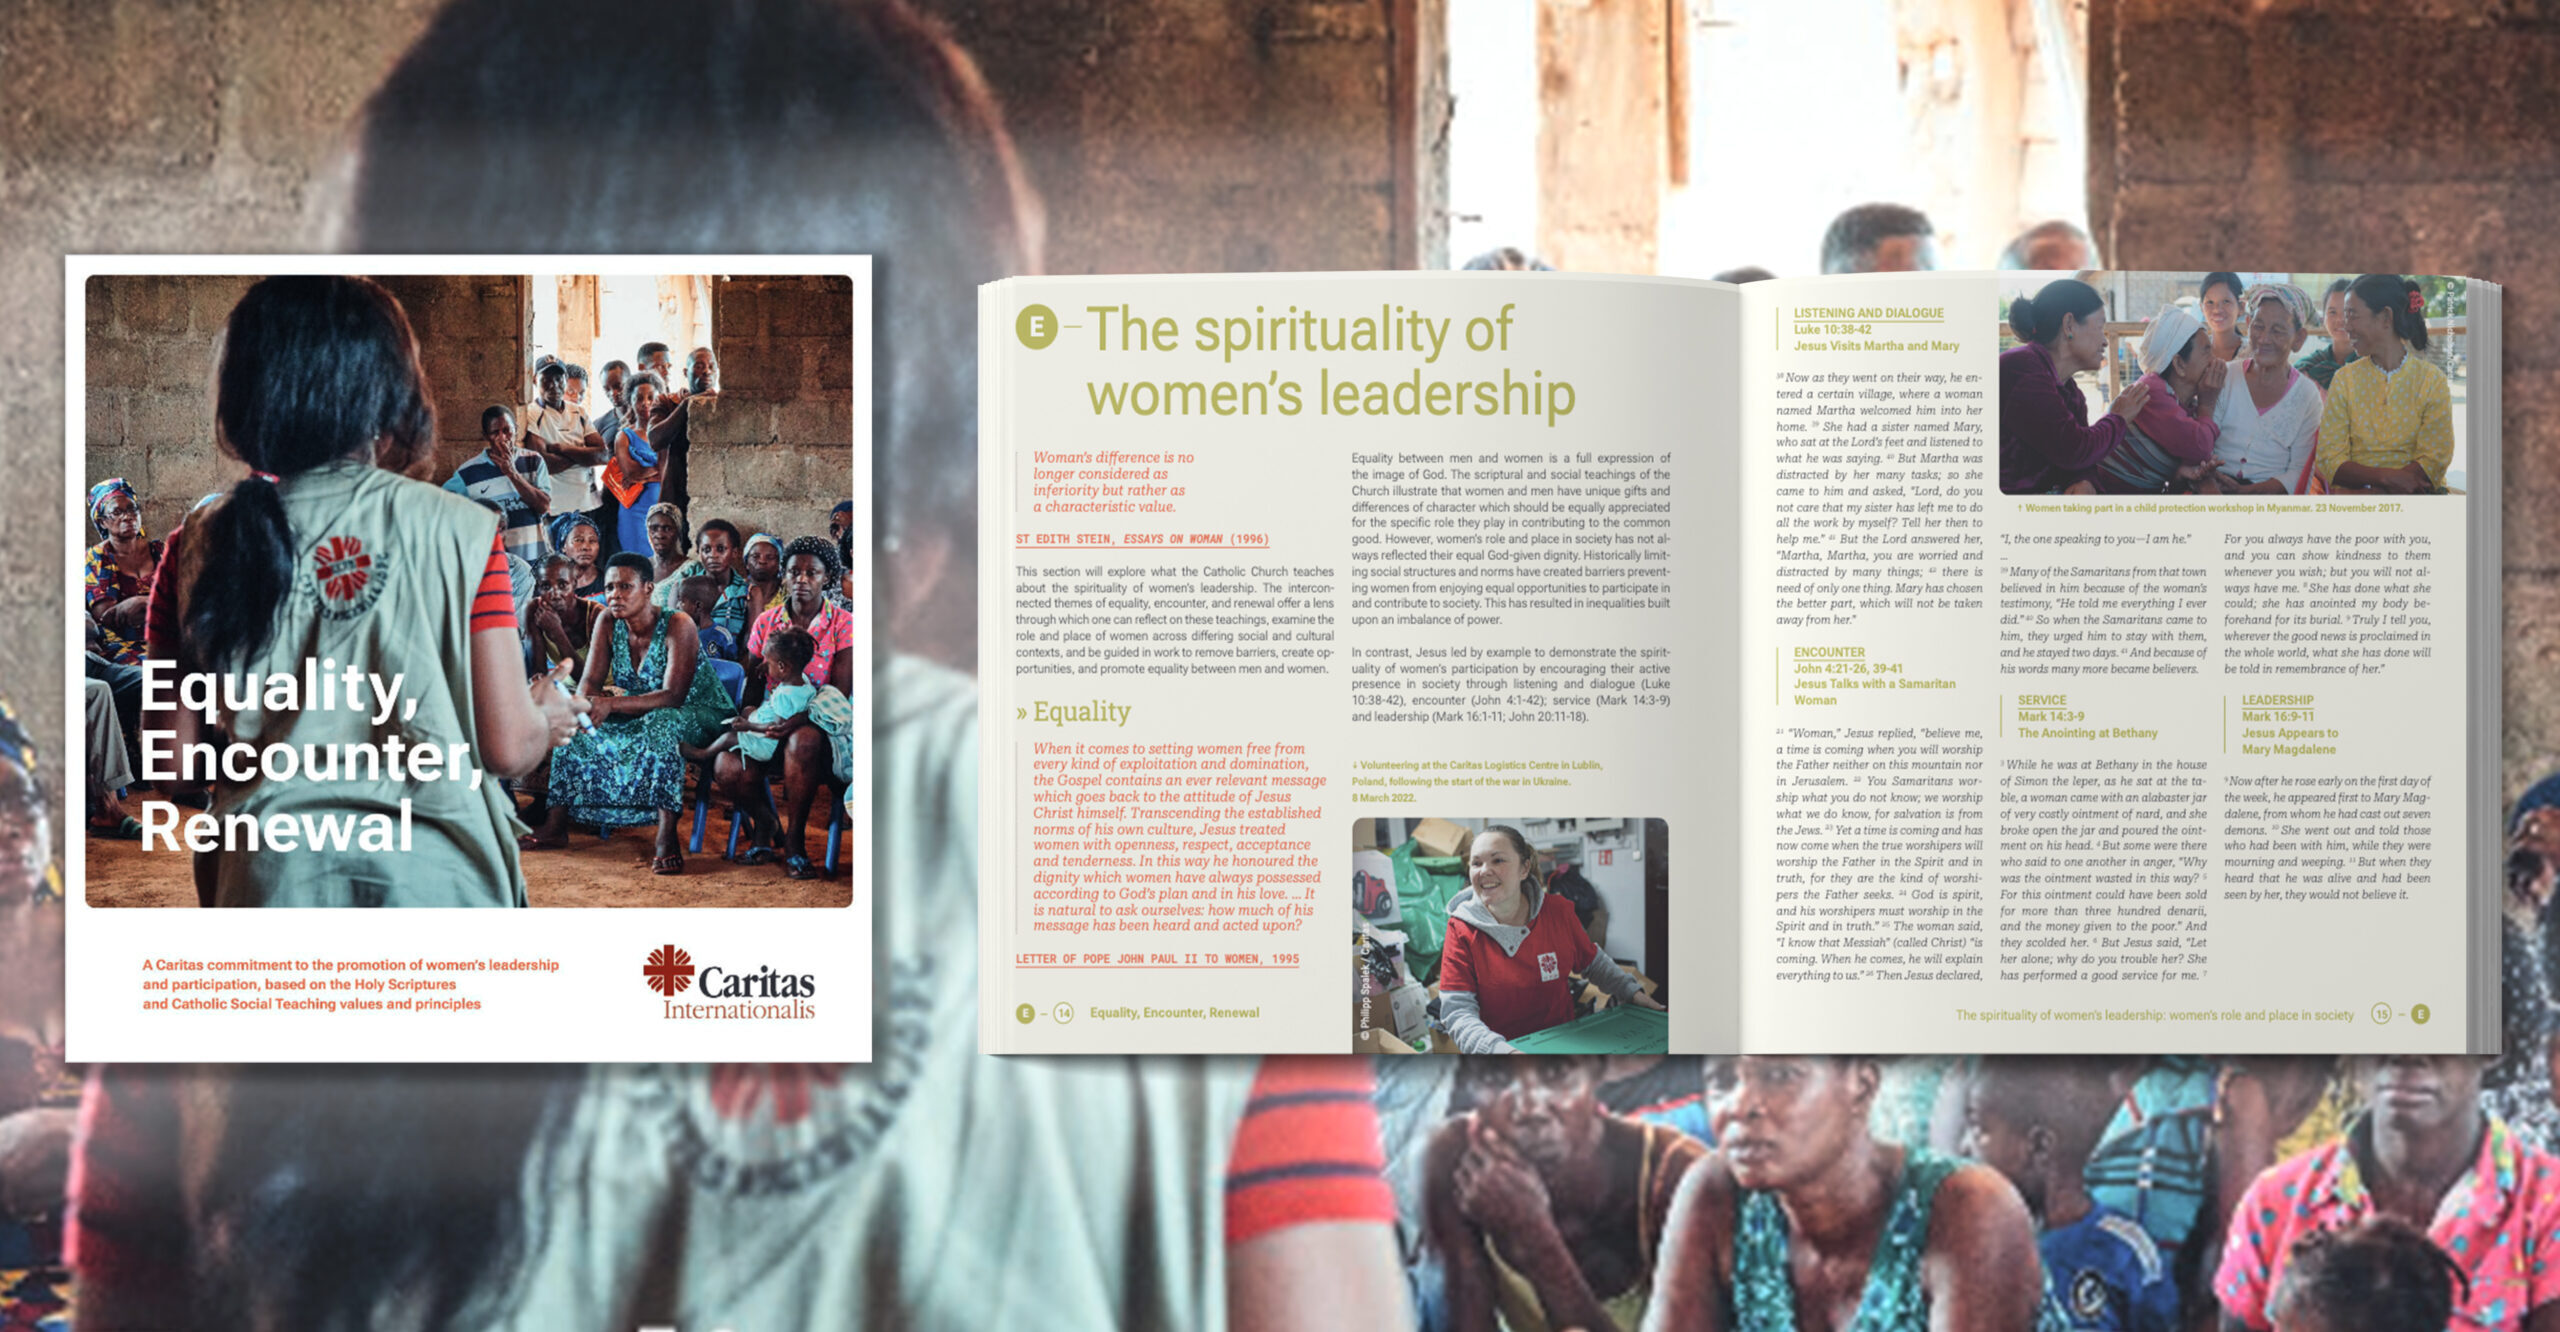 Caritas Internationalis launches a new resource to promote women’s leadership